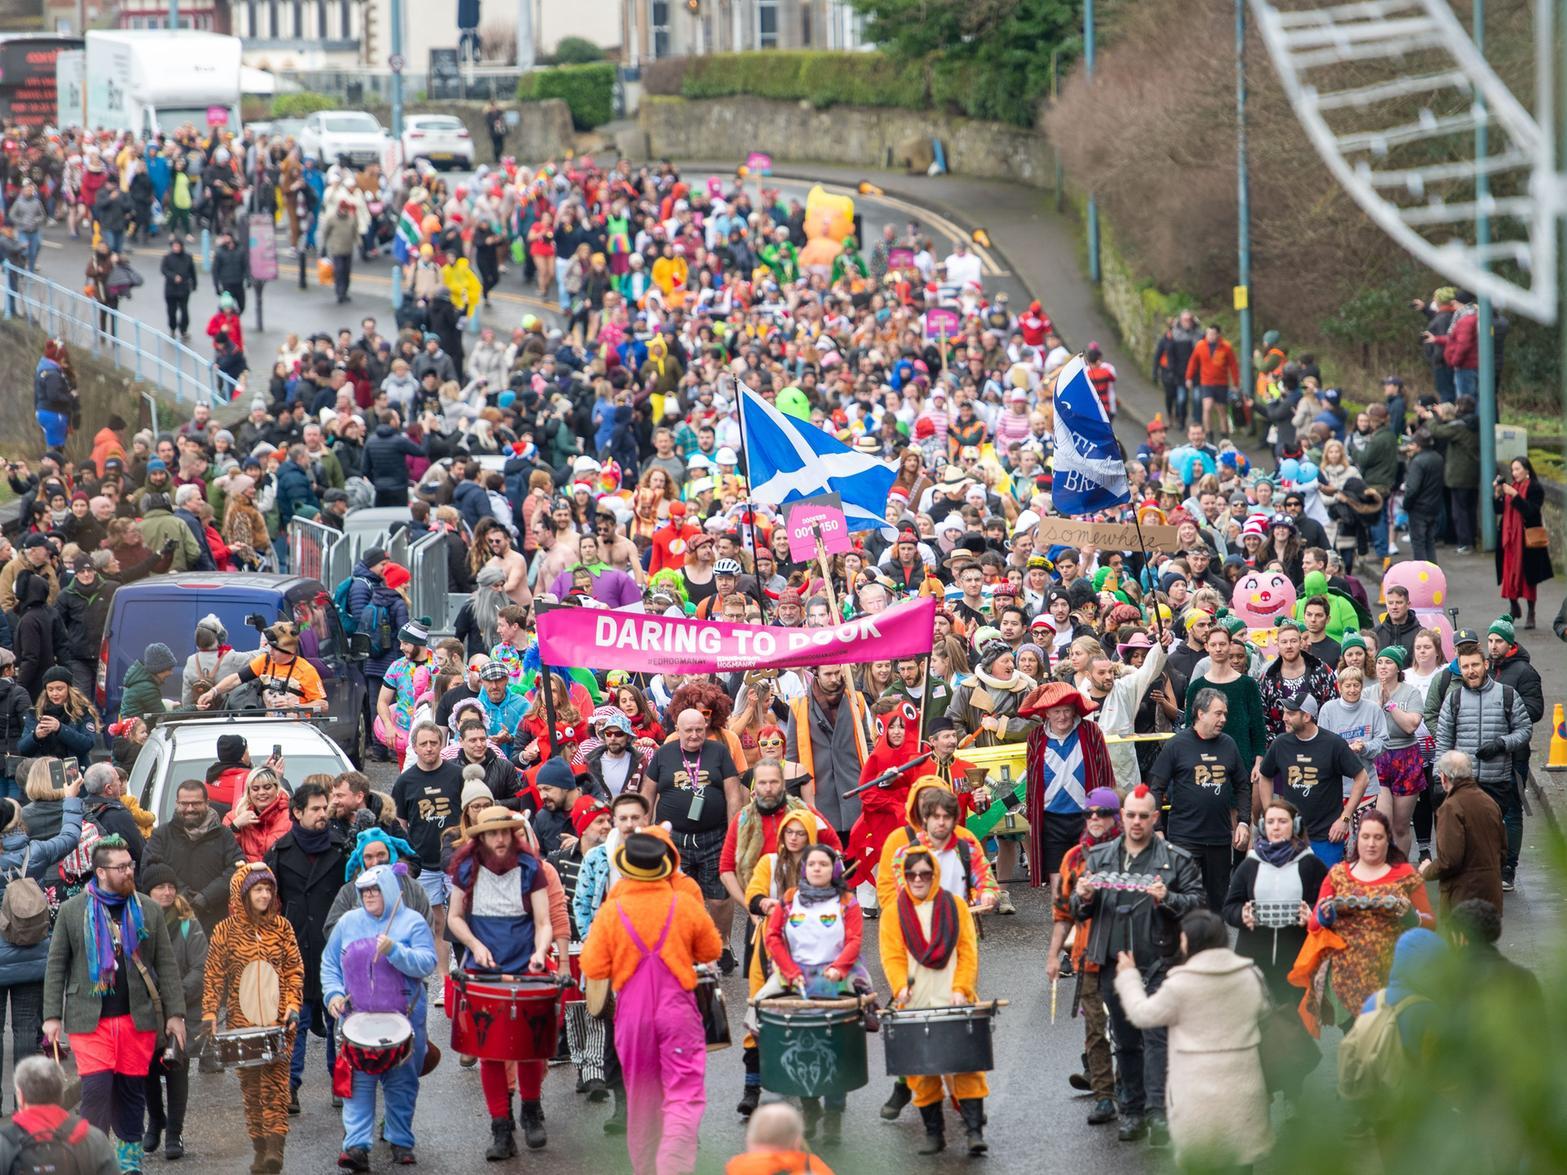 More than 1000 revellers, many clad in fancy dress, took part in Edinburgh's annual Loony Dook event to herald the start of a new decade. Pictures from South Queensferry by Ian Georgeson.